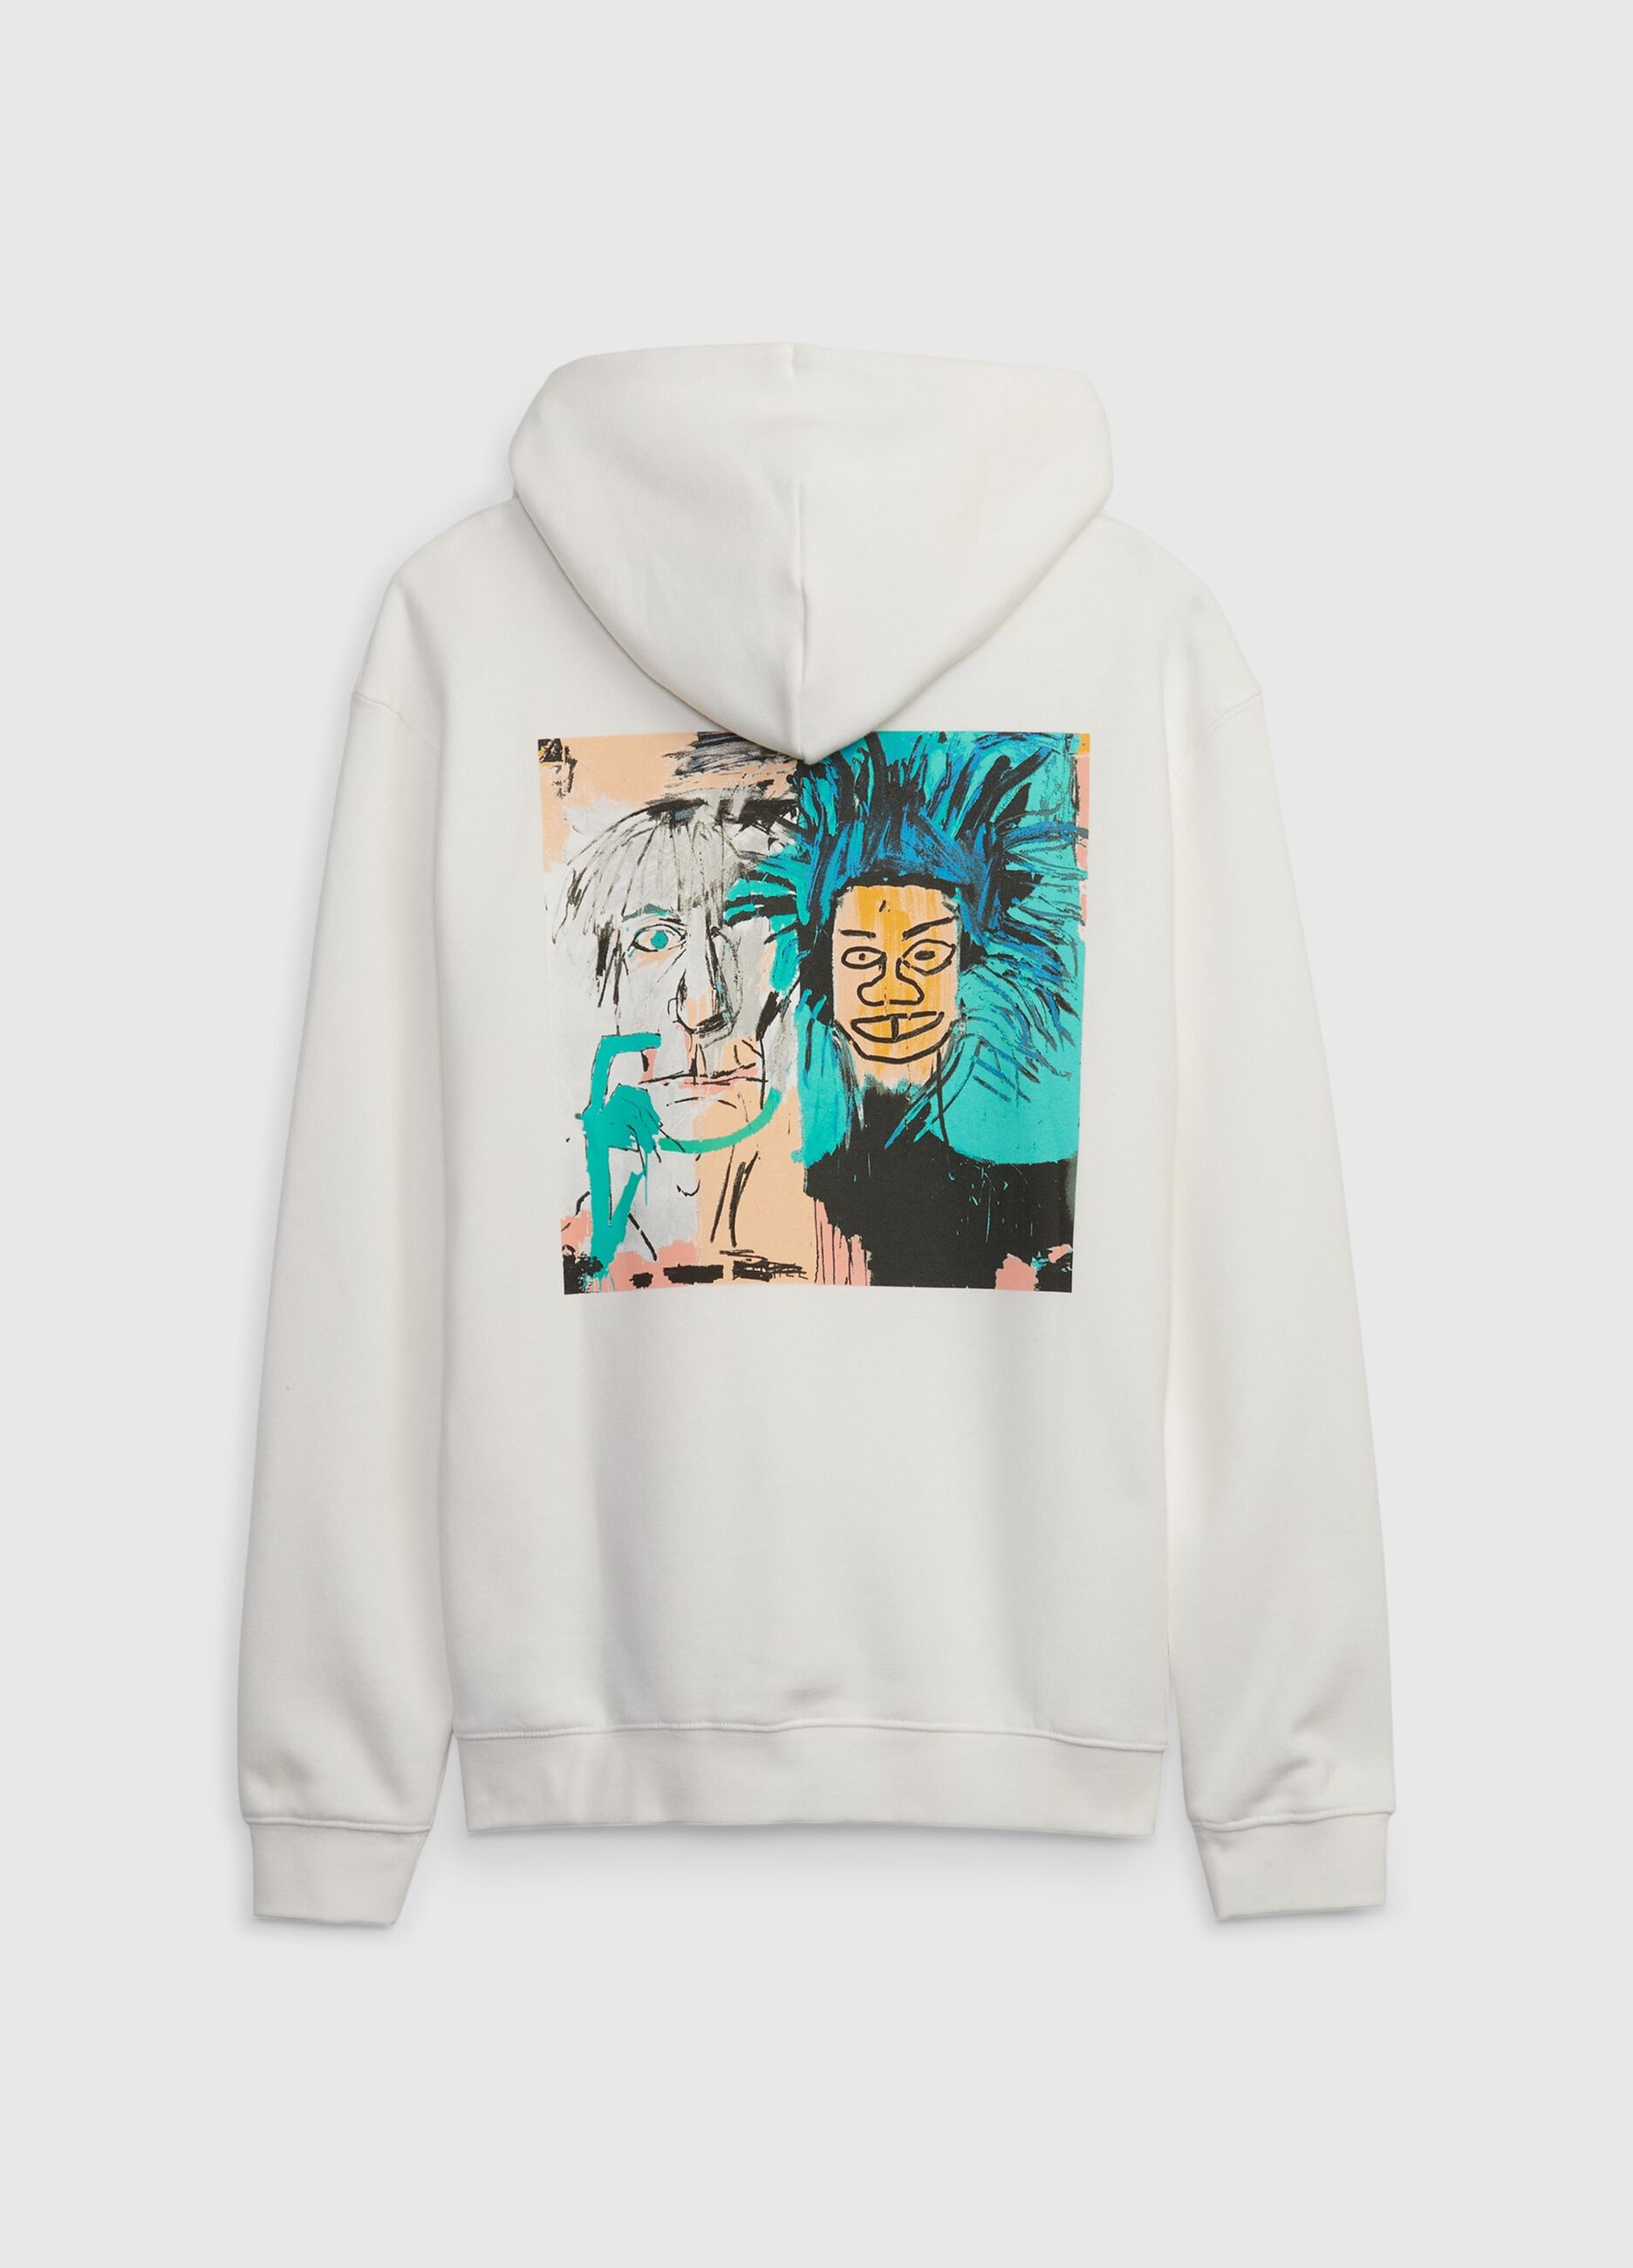 Hoodie with Basquiat print_1